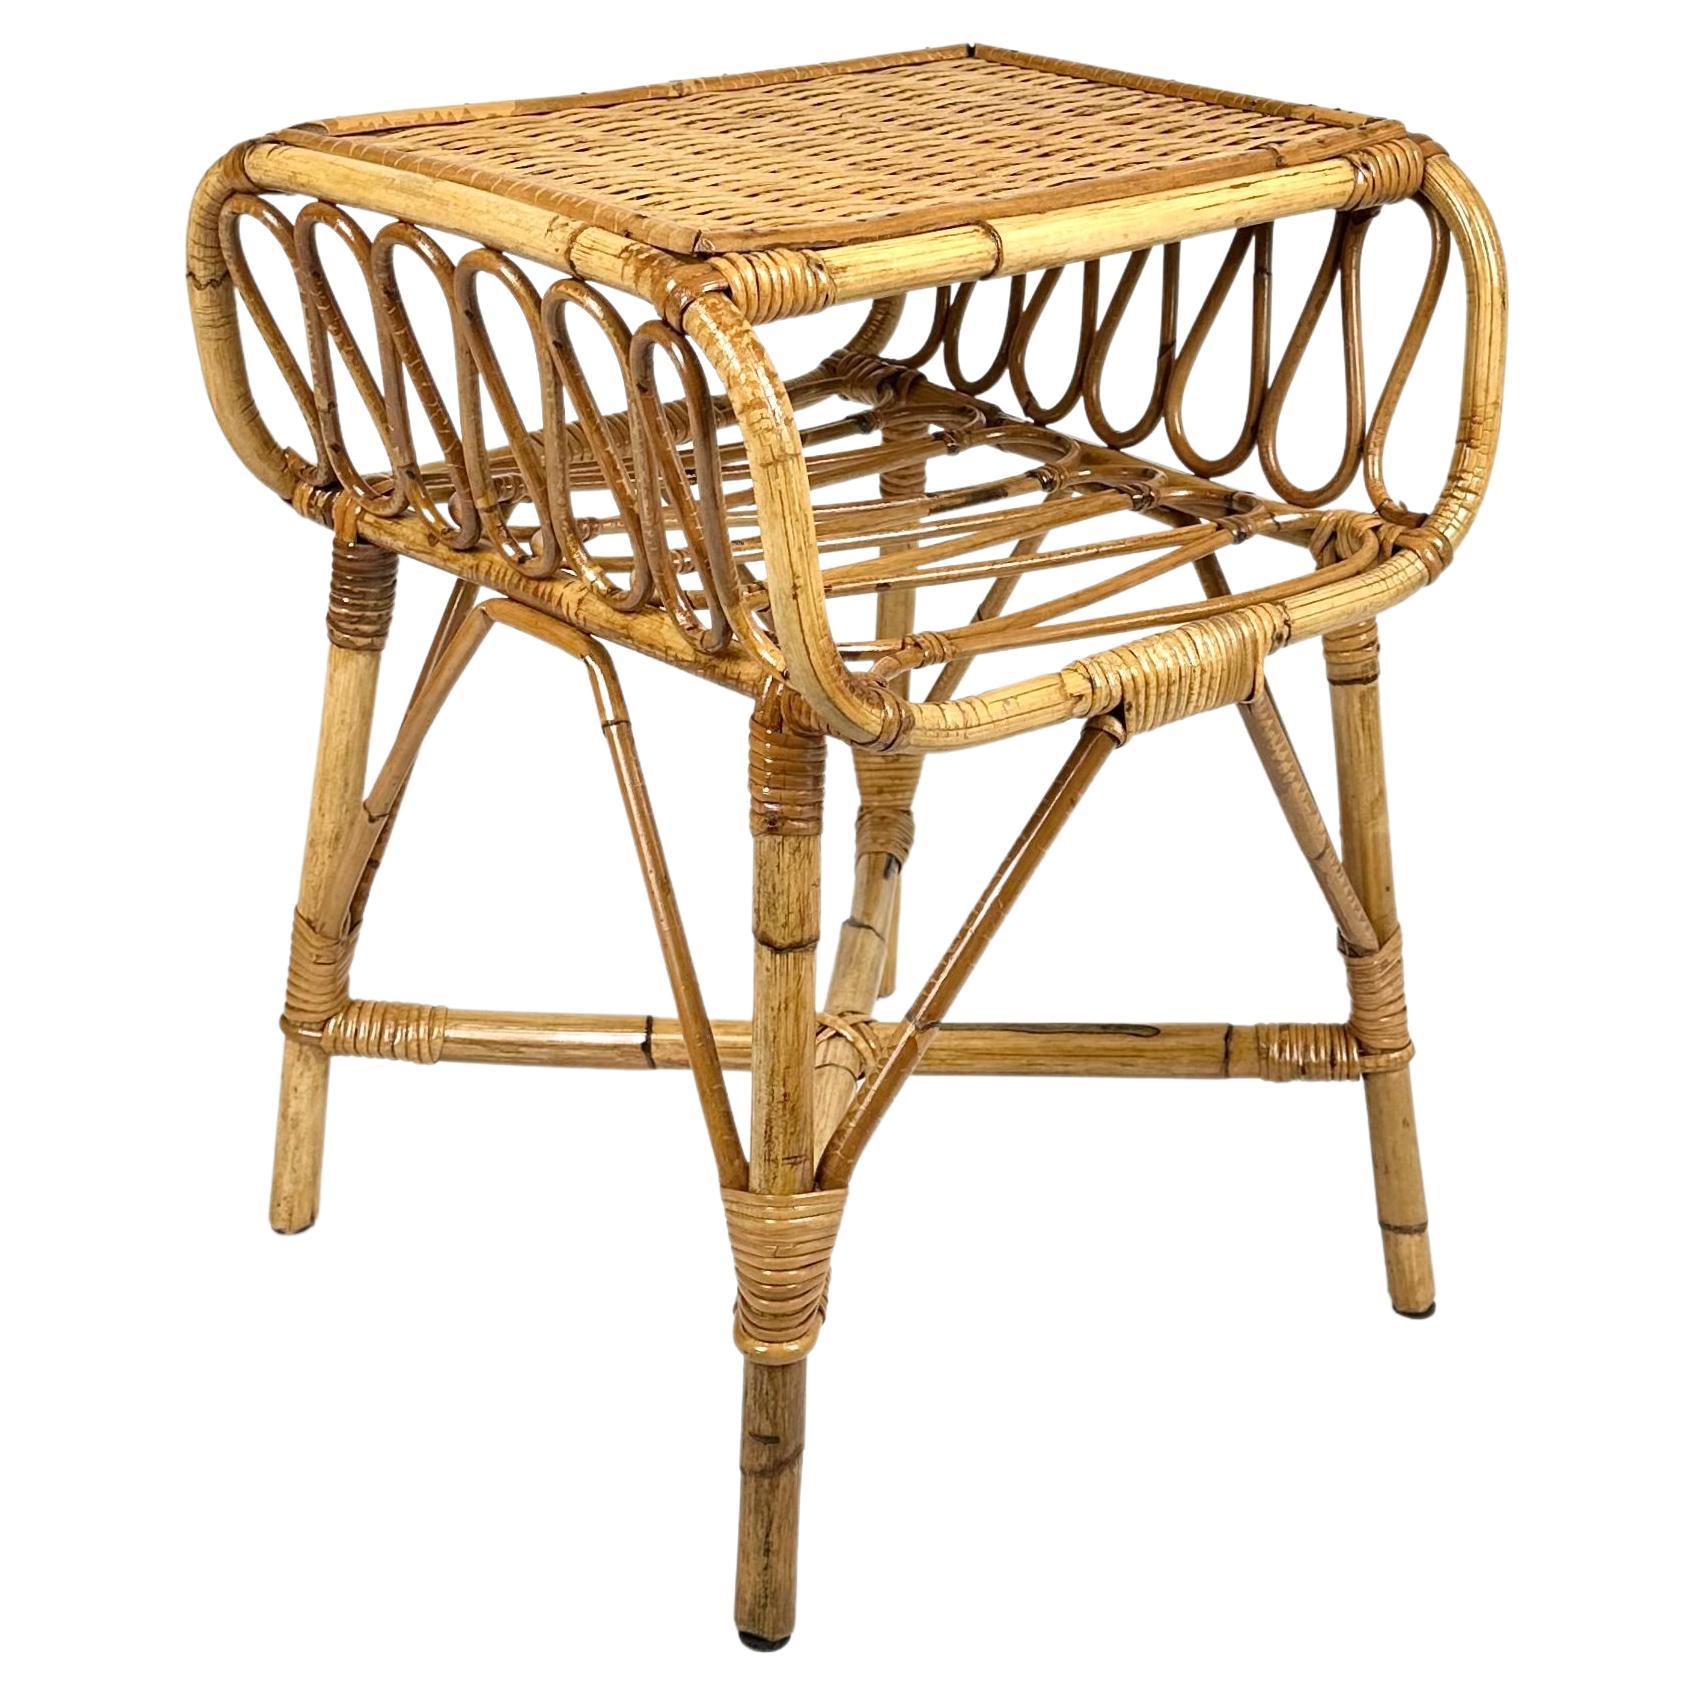 midcentury beautiful bedside table or coffee table in bamboo and rattan in the style of Franco Albini. 

Perfect in any room as well as next to a sofa or in any bathroom

Made in Italy in the 1960s.

Bamboo / rattan has been polished by a